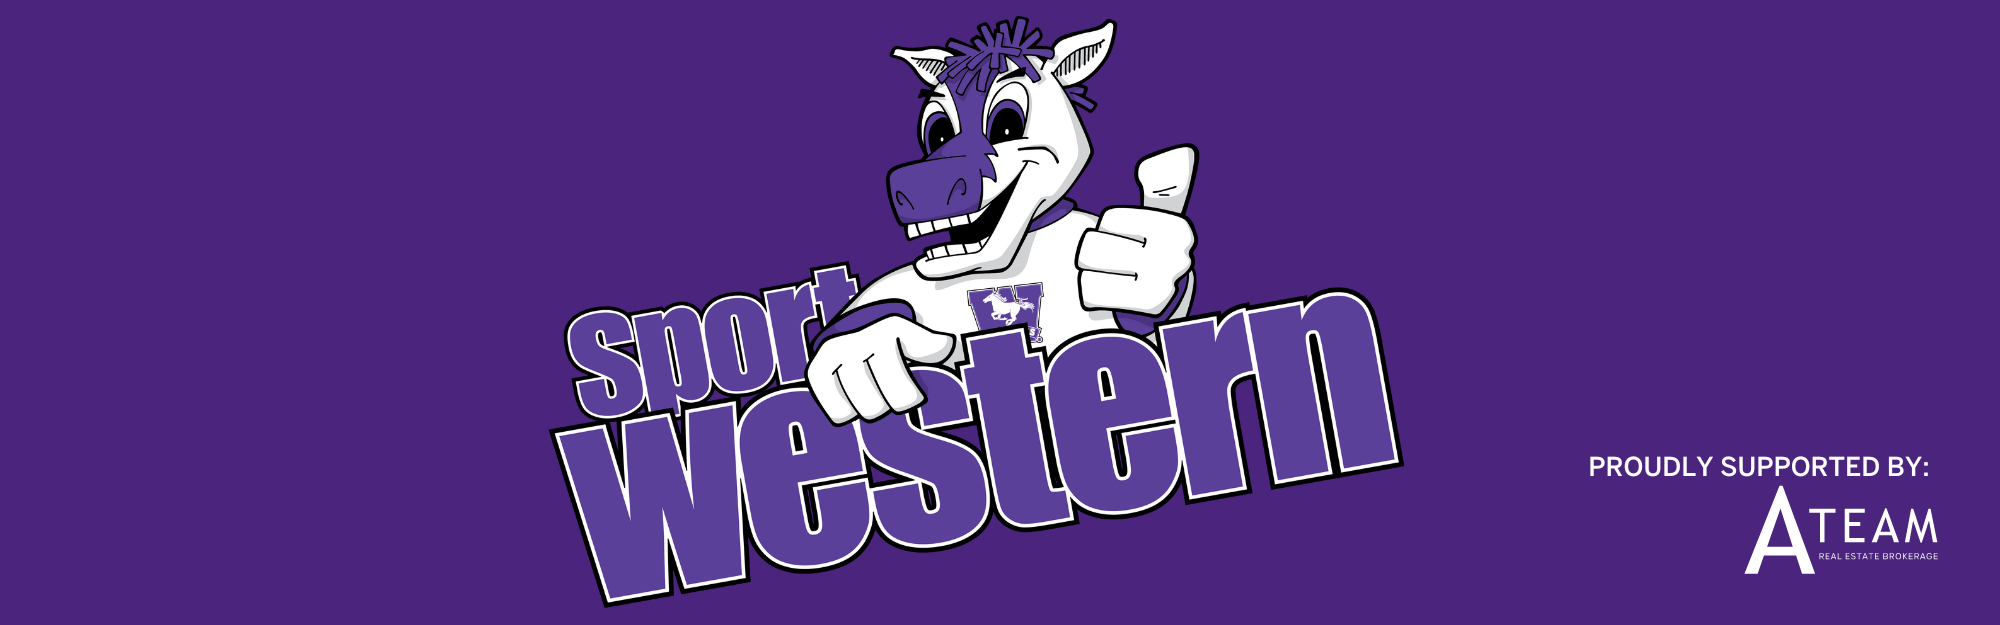 Sport Western Logo with cartoon JW Mascot - Mustangs Horse. Purple and White.